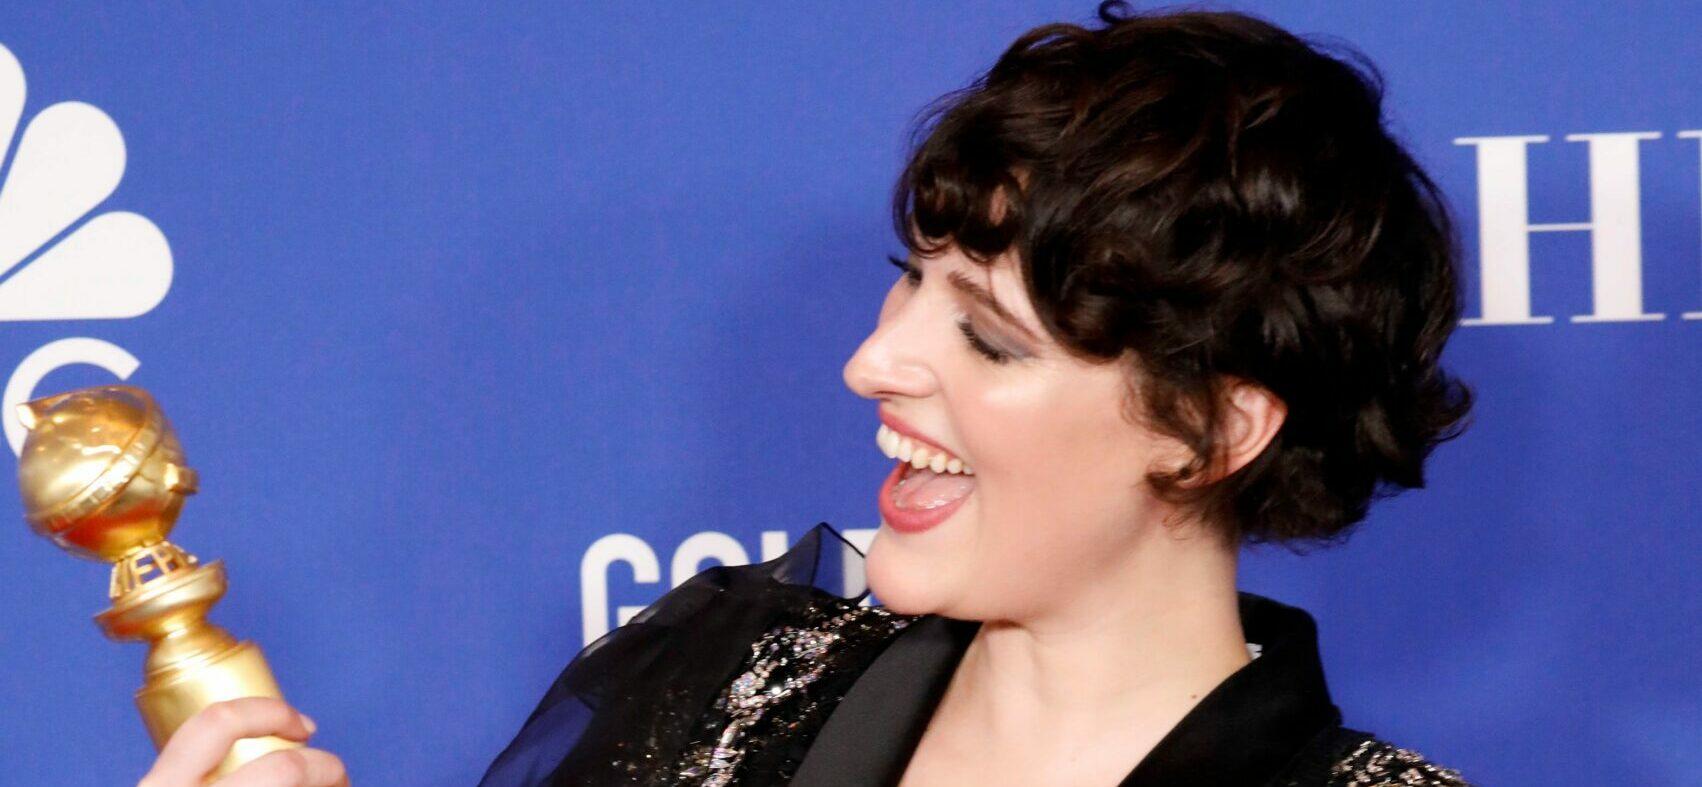 Press room during the 77th Annual Golden Globe Awards at The Beverly Hilton Hotel on January 5, 2020 in Beverly Hills, California. 05 Jan 2020 Pictured: Phoebe Waller-Bridge,. Photo credit: MEGA TheMegaAgency.com +1 888 505 6342 (Mega Agency TagID: MEGA588142_003.jpg) [Photo via Mega Agency]